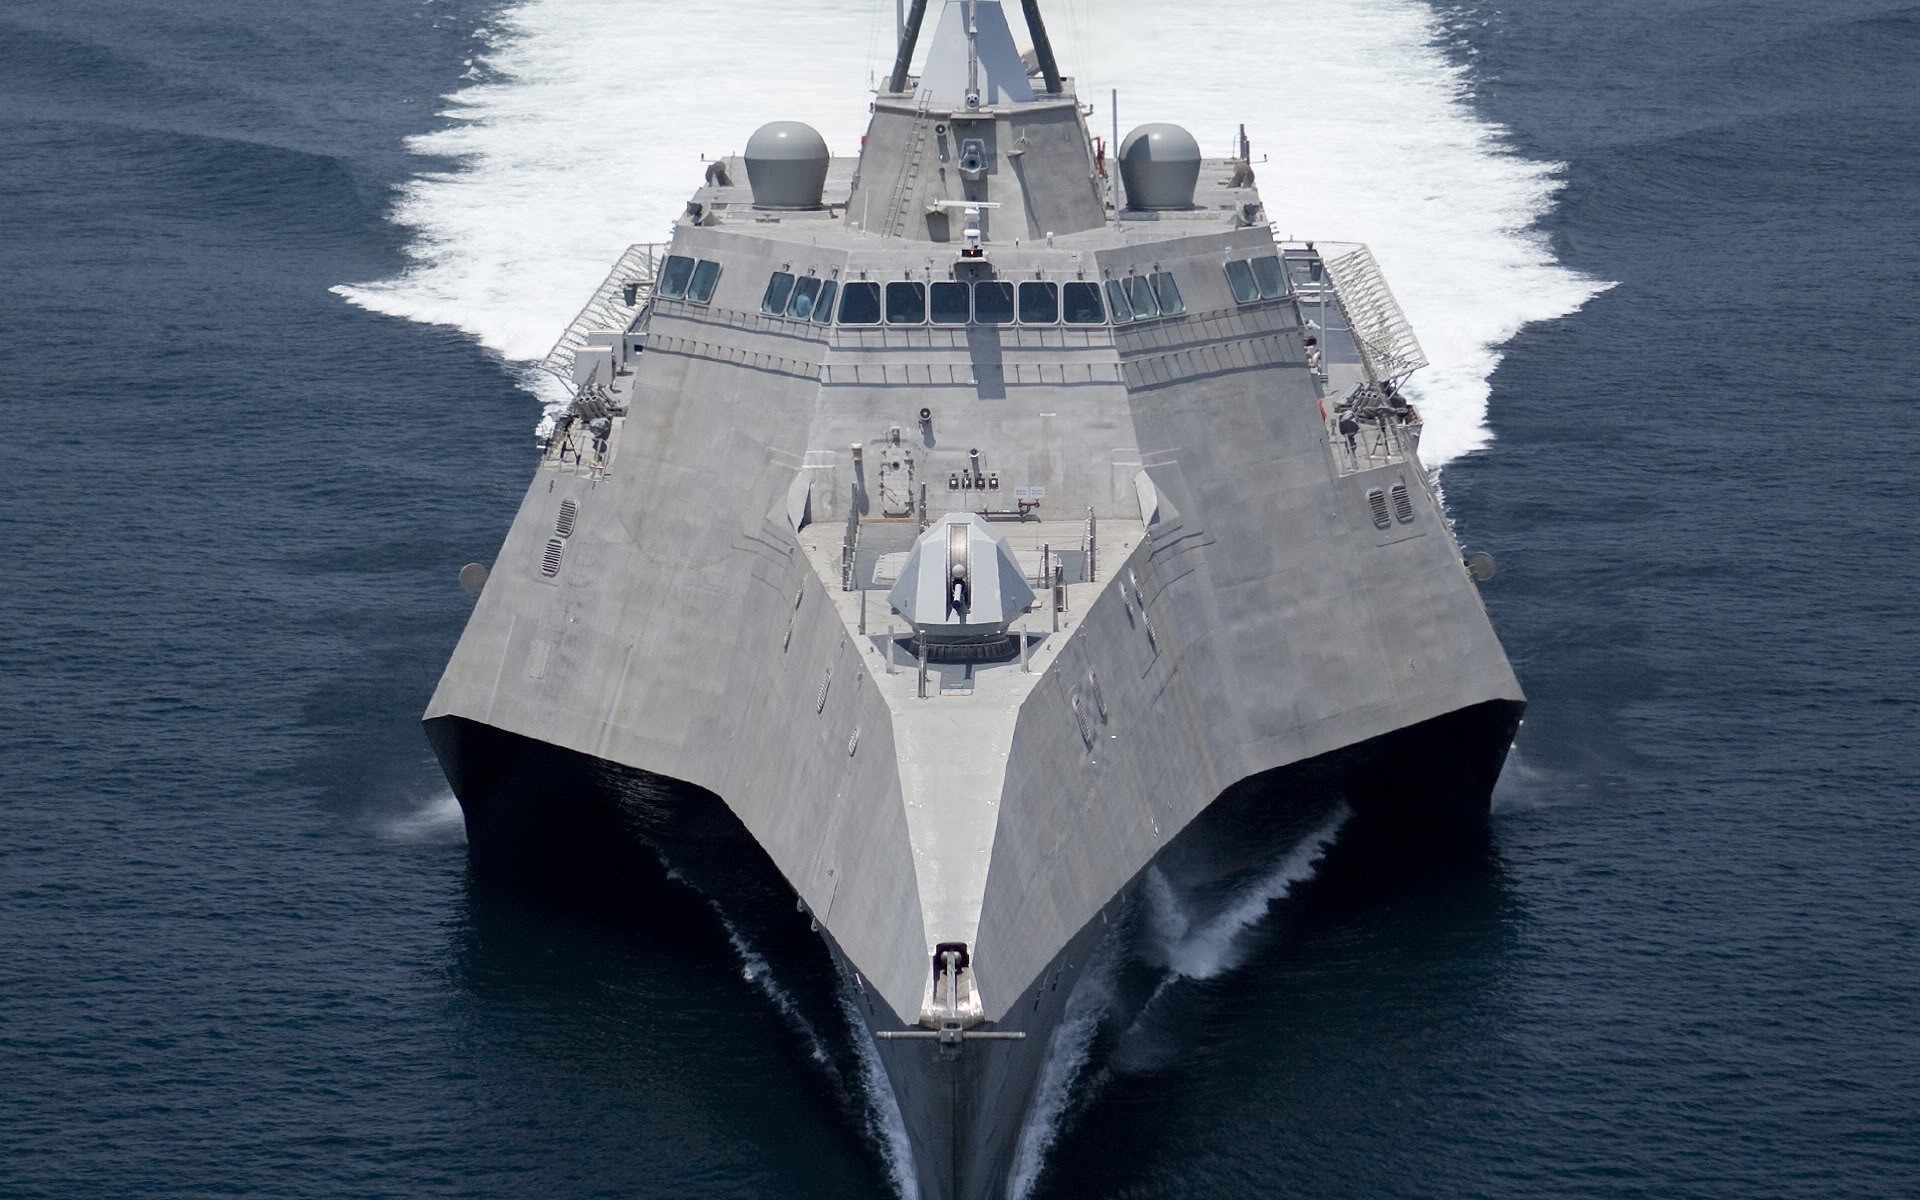 General 1920x1200 ship USS Independence (LCS-2) military United States Navy Destroyer warship vehicle military vehicle